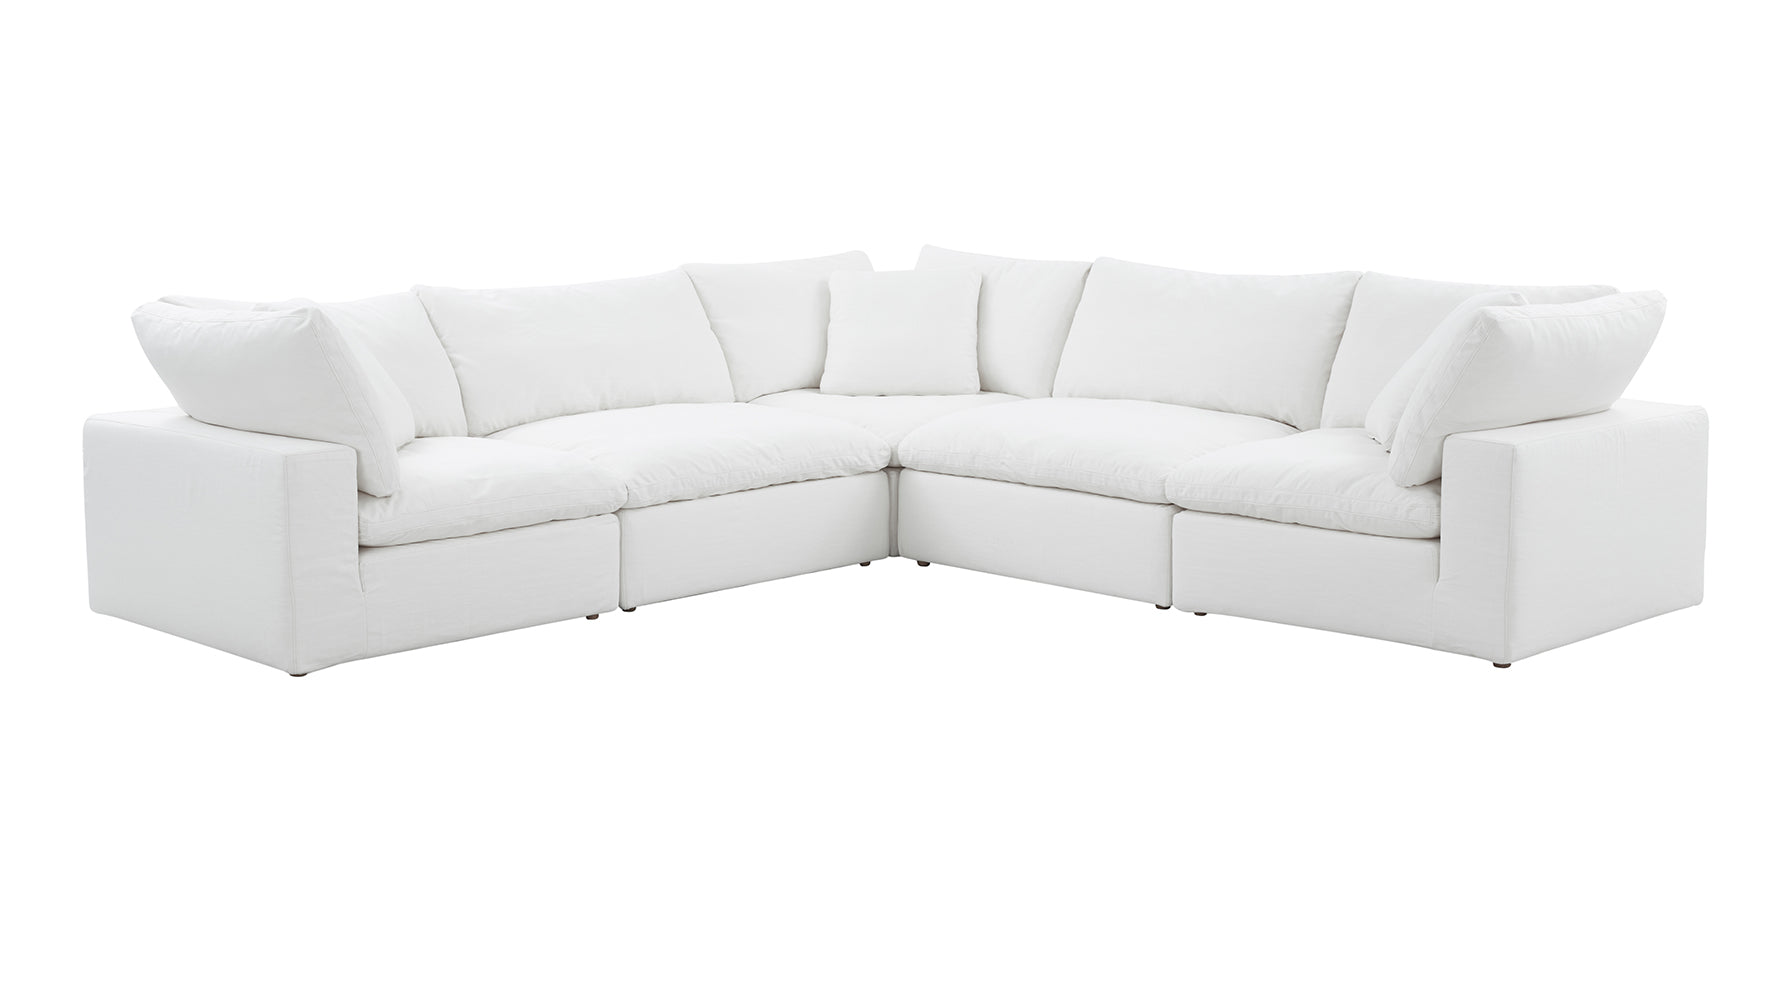 Movie Night™ 5-Piece Modular Sectional Closed, Large, Brie - Image 3